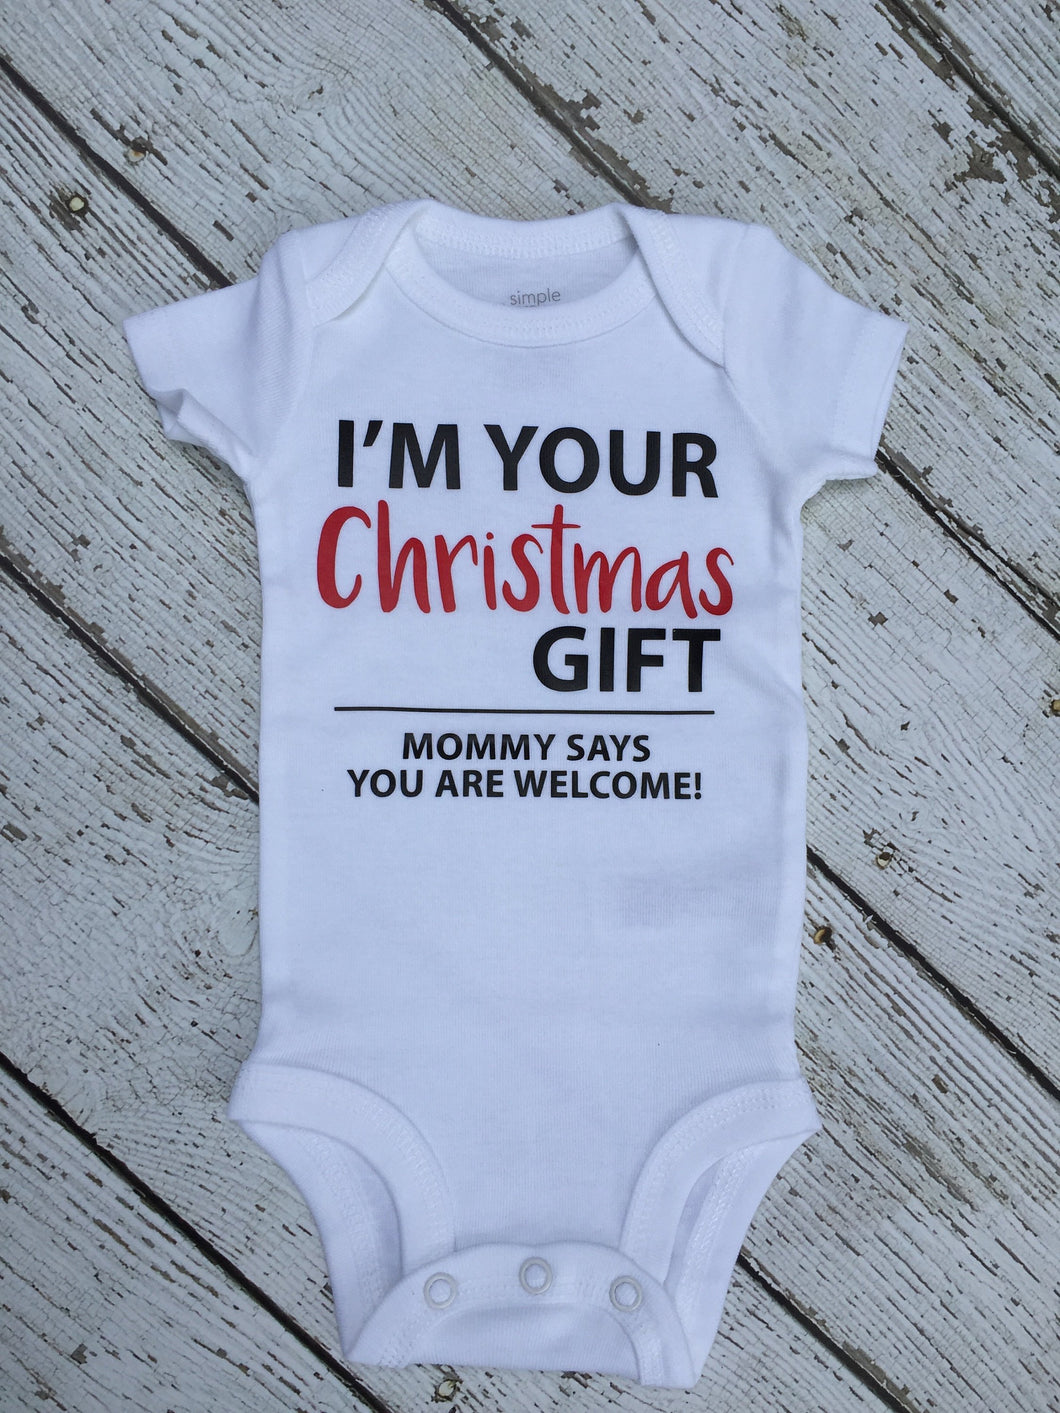 Christmas Gift From Son, Christmas Gift To Dad, Christmas Gift From Baby, Christmas Gift For New Dad, Christmas Gifts Ideas For Dad